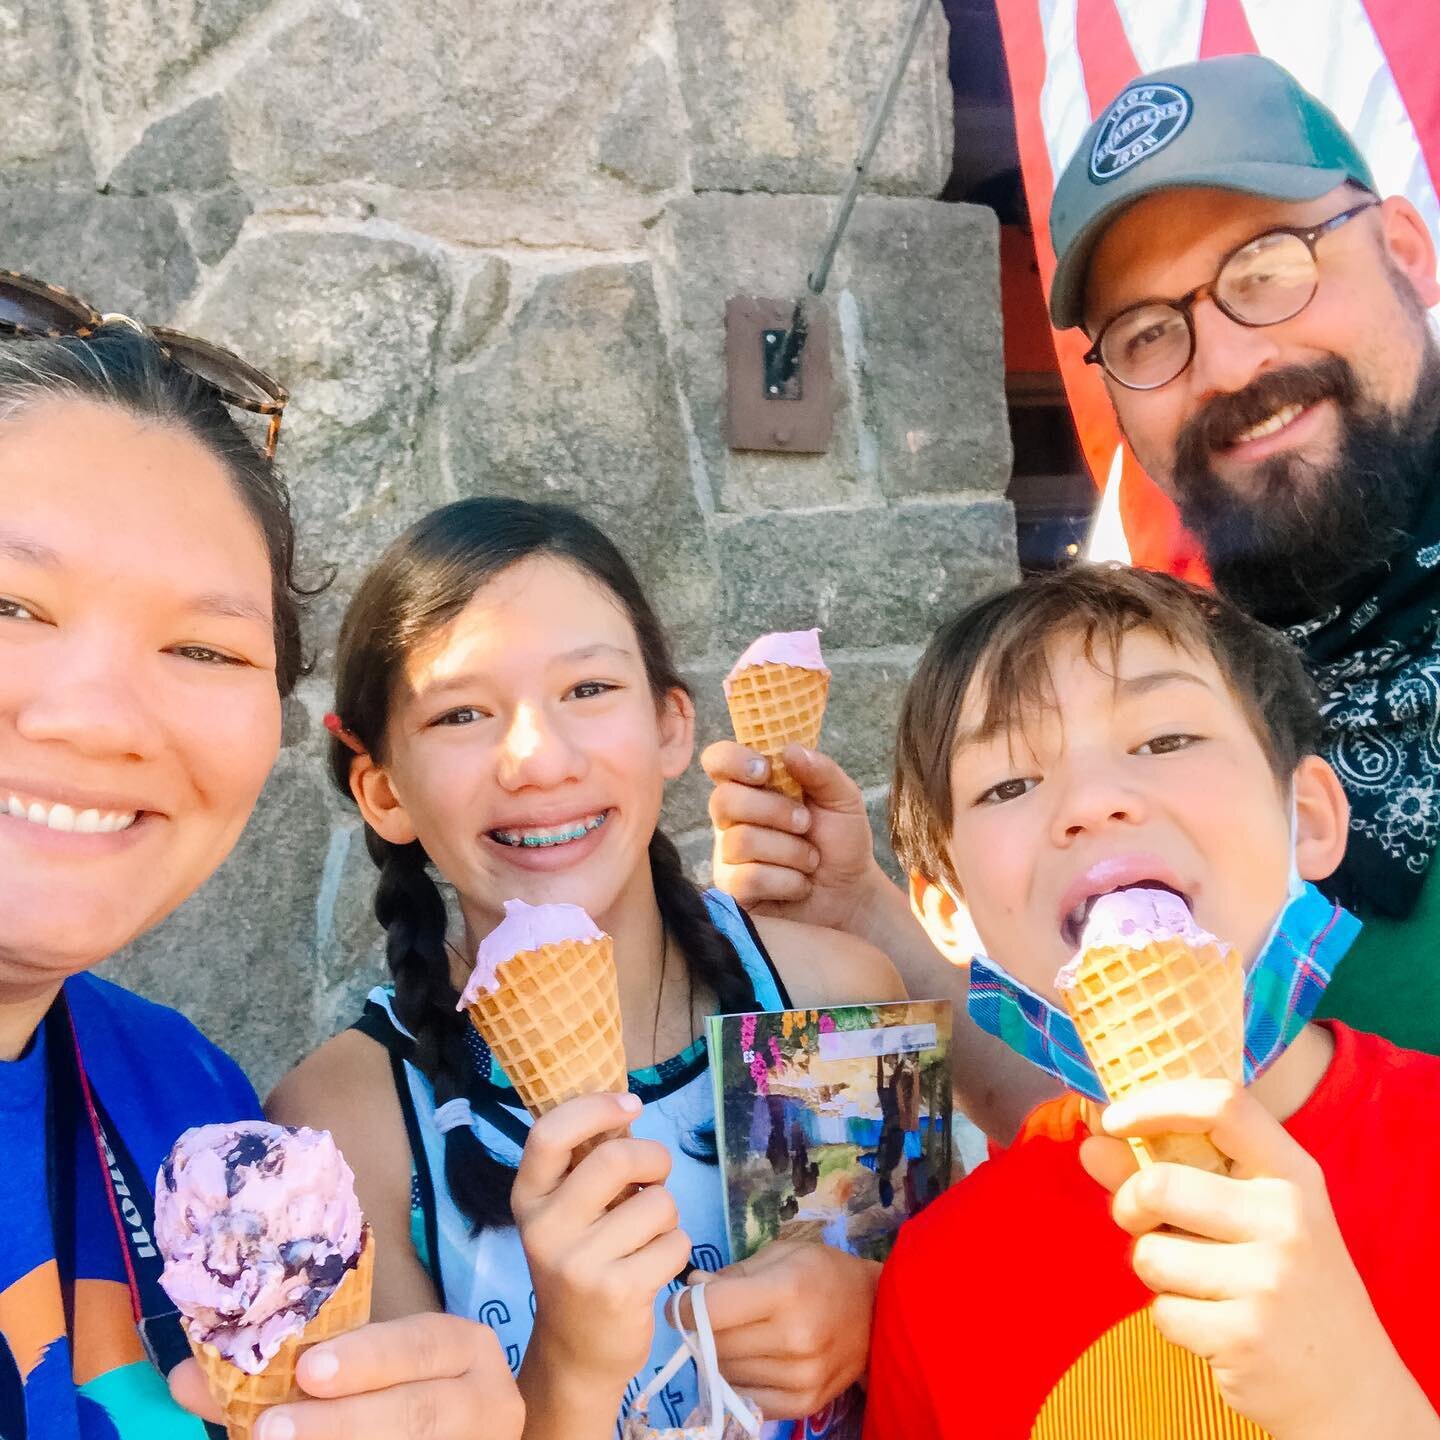 Love our little summer loving family! By the way we all scream for ice cream...Huckleberry ice cream because it's the best. Have you ever tried it? So yummy!